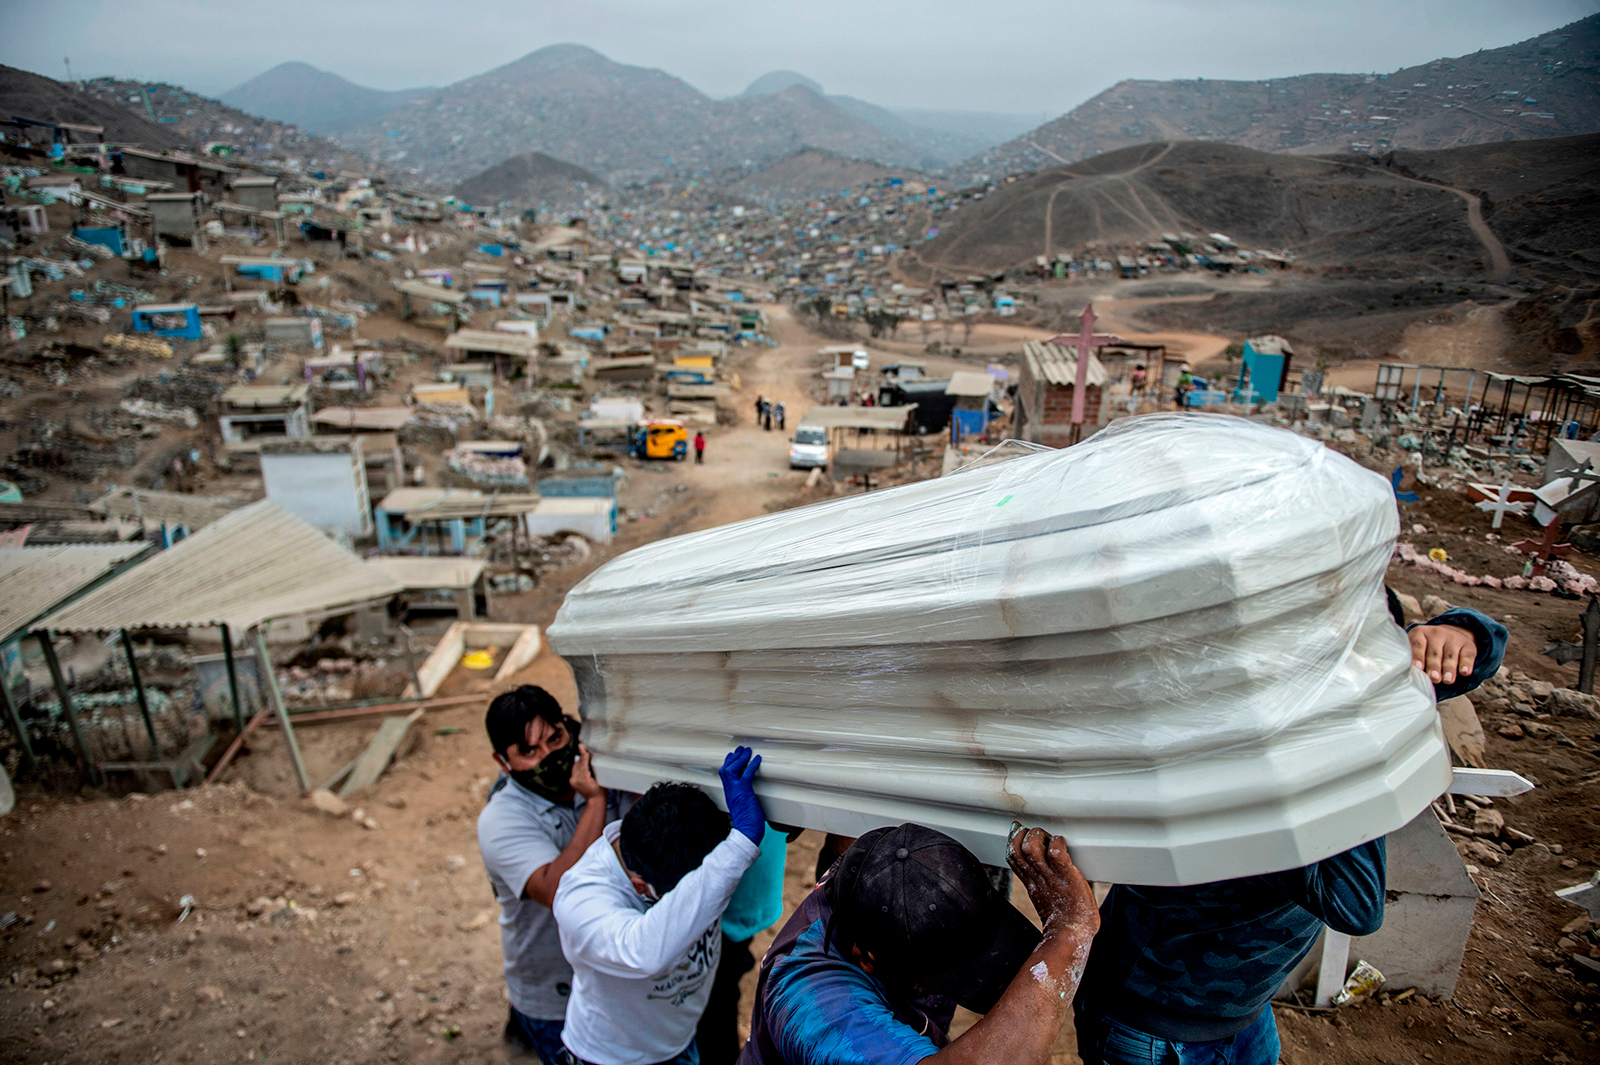 Relatives carry the coffin of a suspected COVID-19 victim at the Nueva Esperanza cemetery in the southern outskirts of Lima, Peru, on May 30.